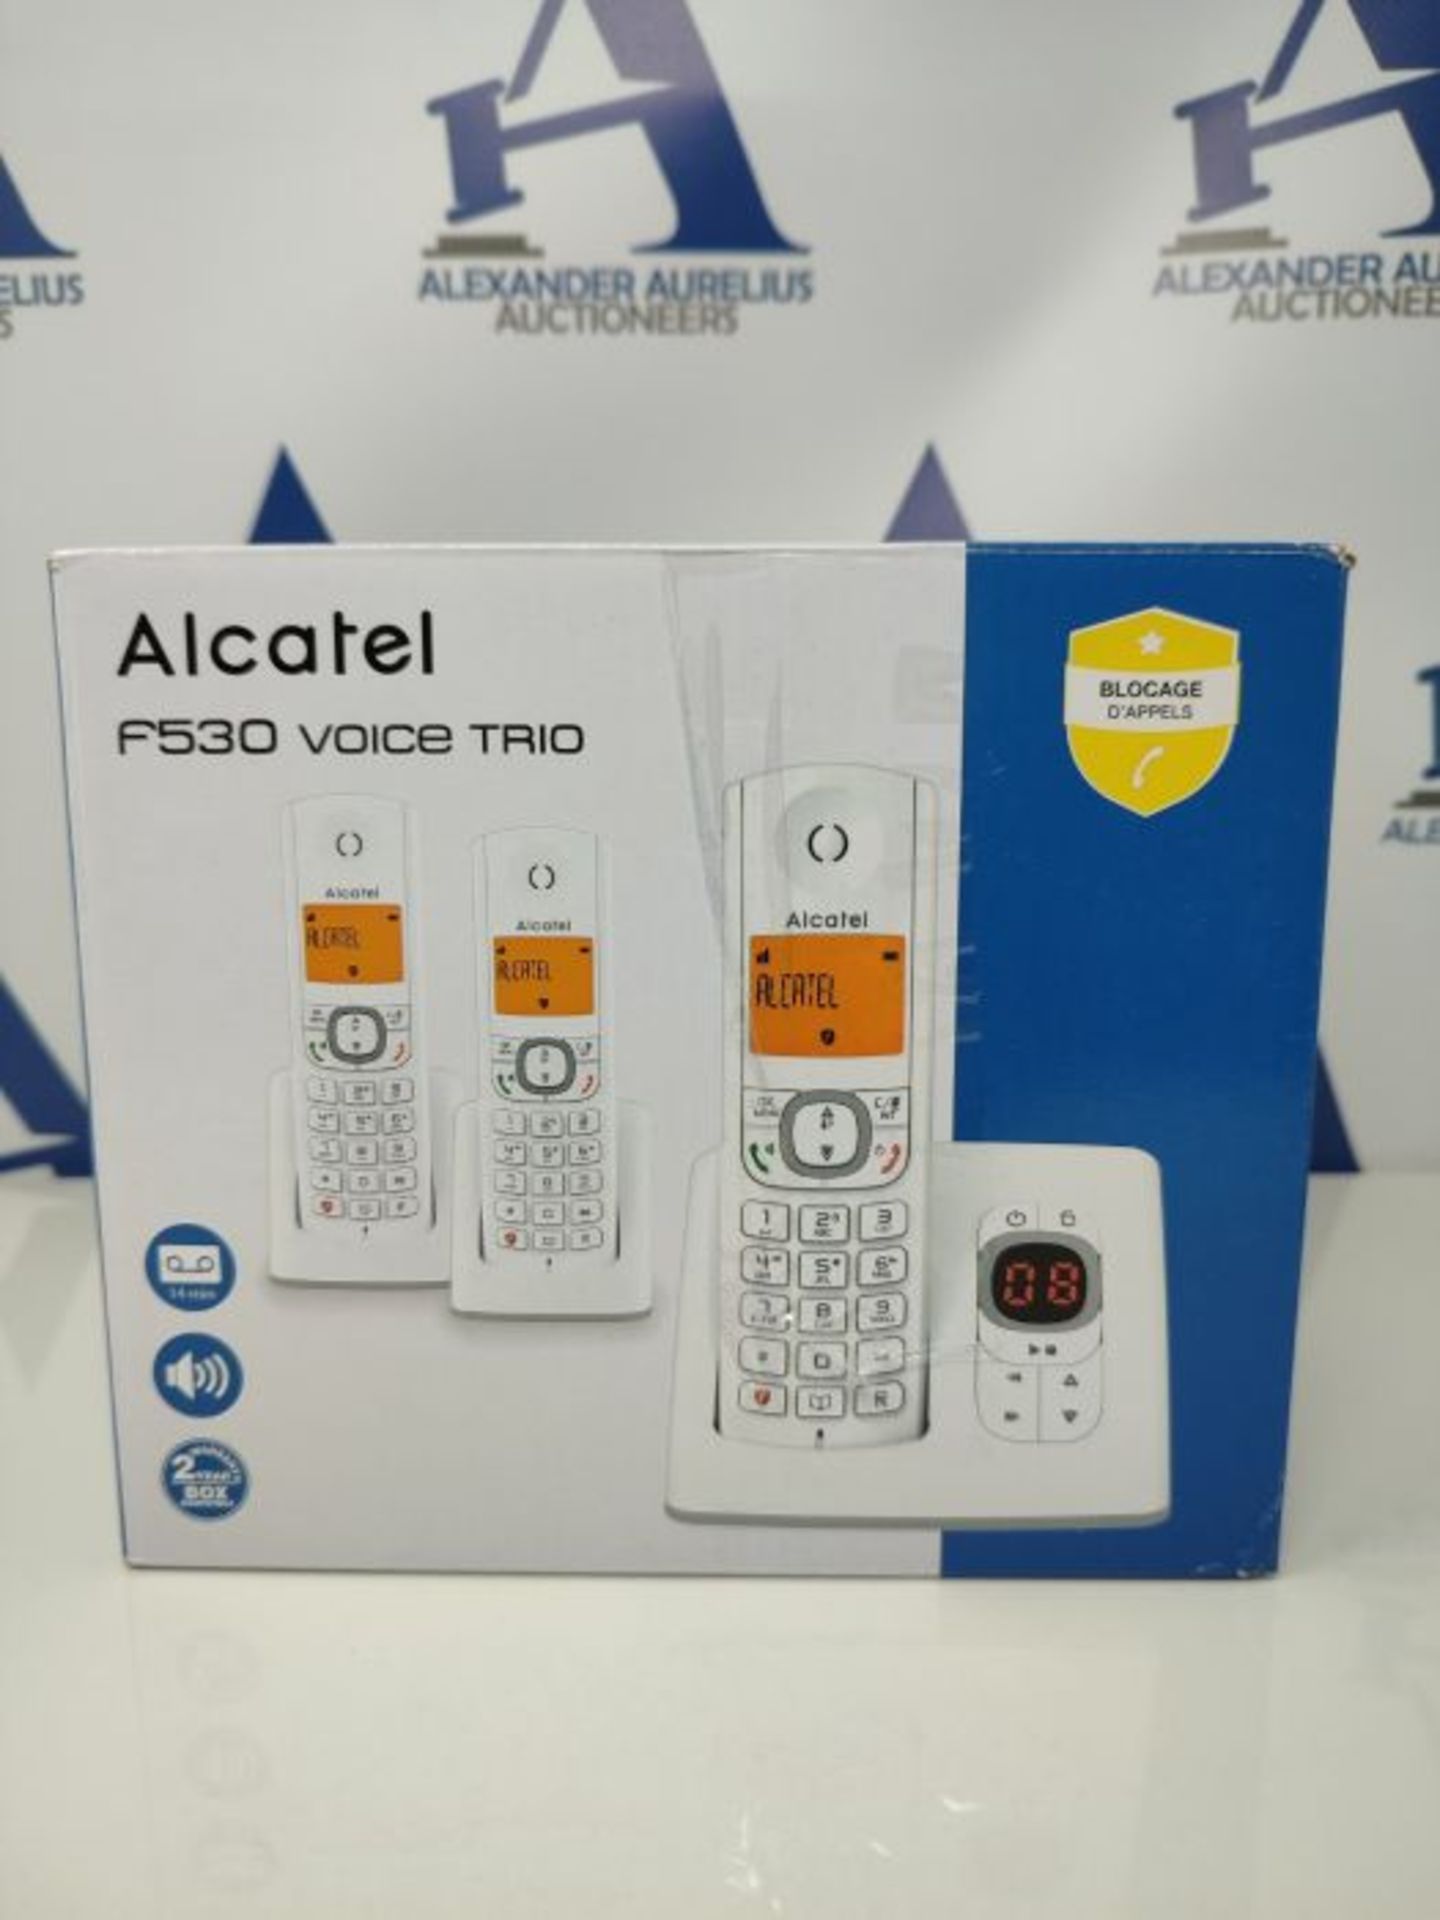 RRP £69.00 Alcatel F530 Voice TRIO Candy-Bar - Image 2 of 3